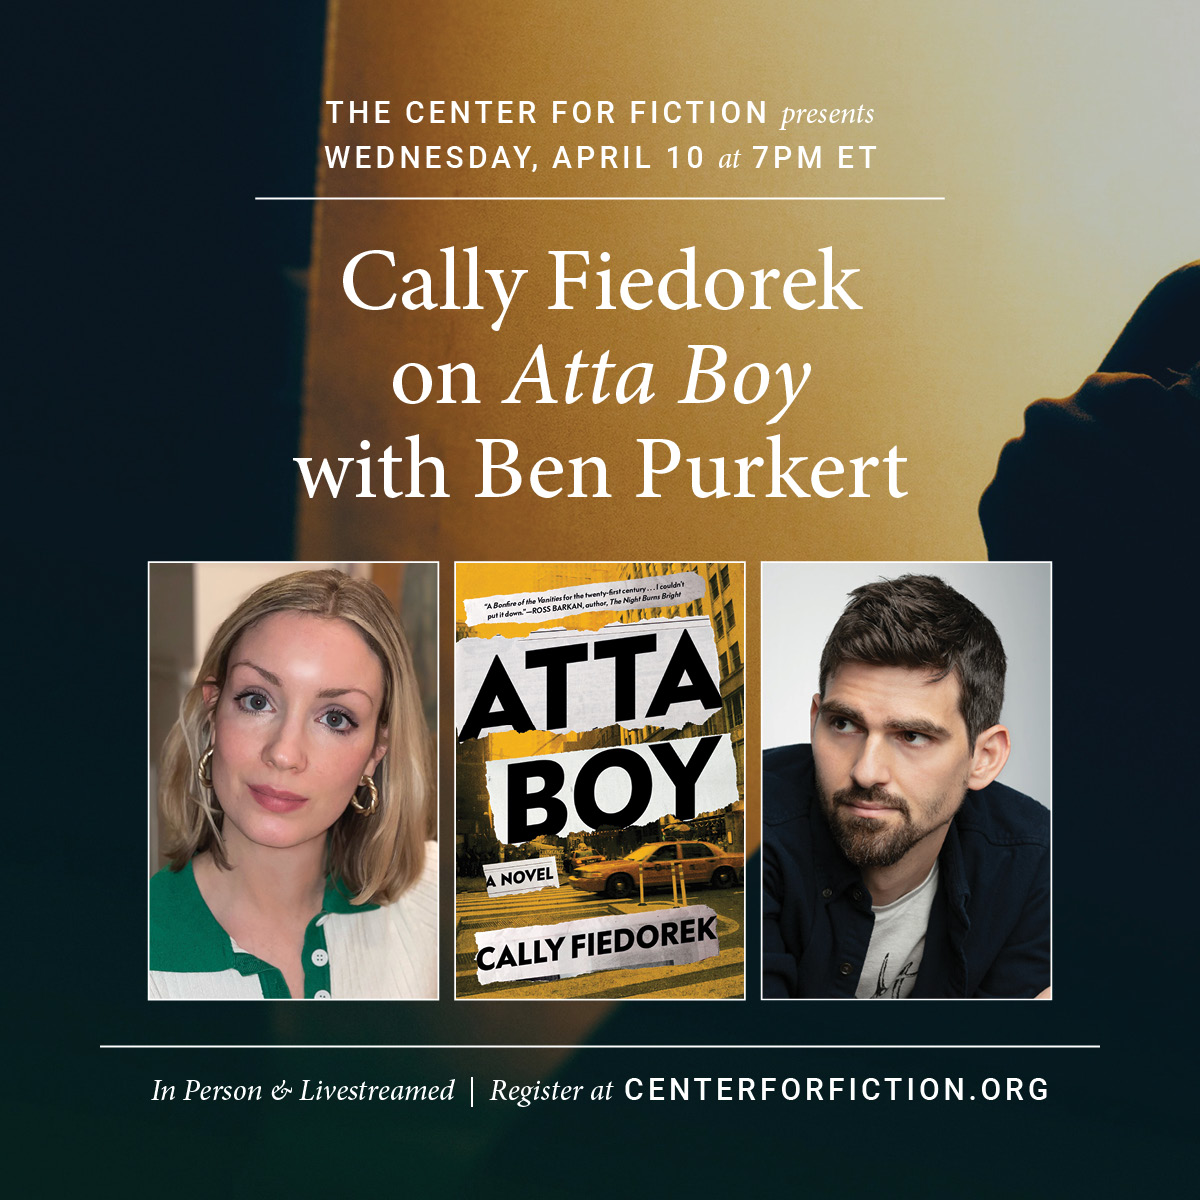 We are thrilled to welcome back Cally Fiedorek, a 2019 Emerging Writer Fellow, to celebrate the launch of her debut novel, Atta Boy! Fiedorek will be in conversation with Ben Purkert (The Men Can't Be Saved). Get your tickets here: tinyurl.com/4nh4xupb